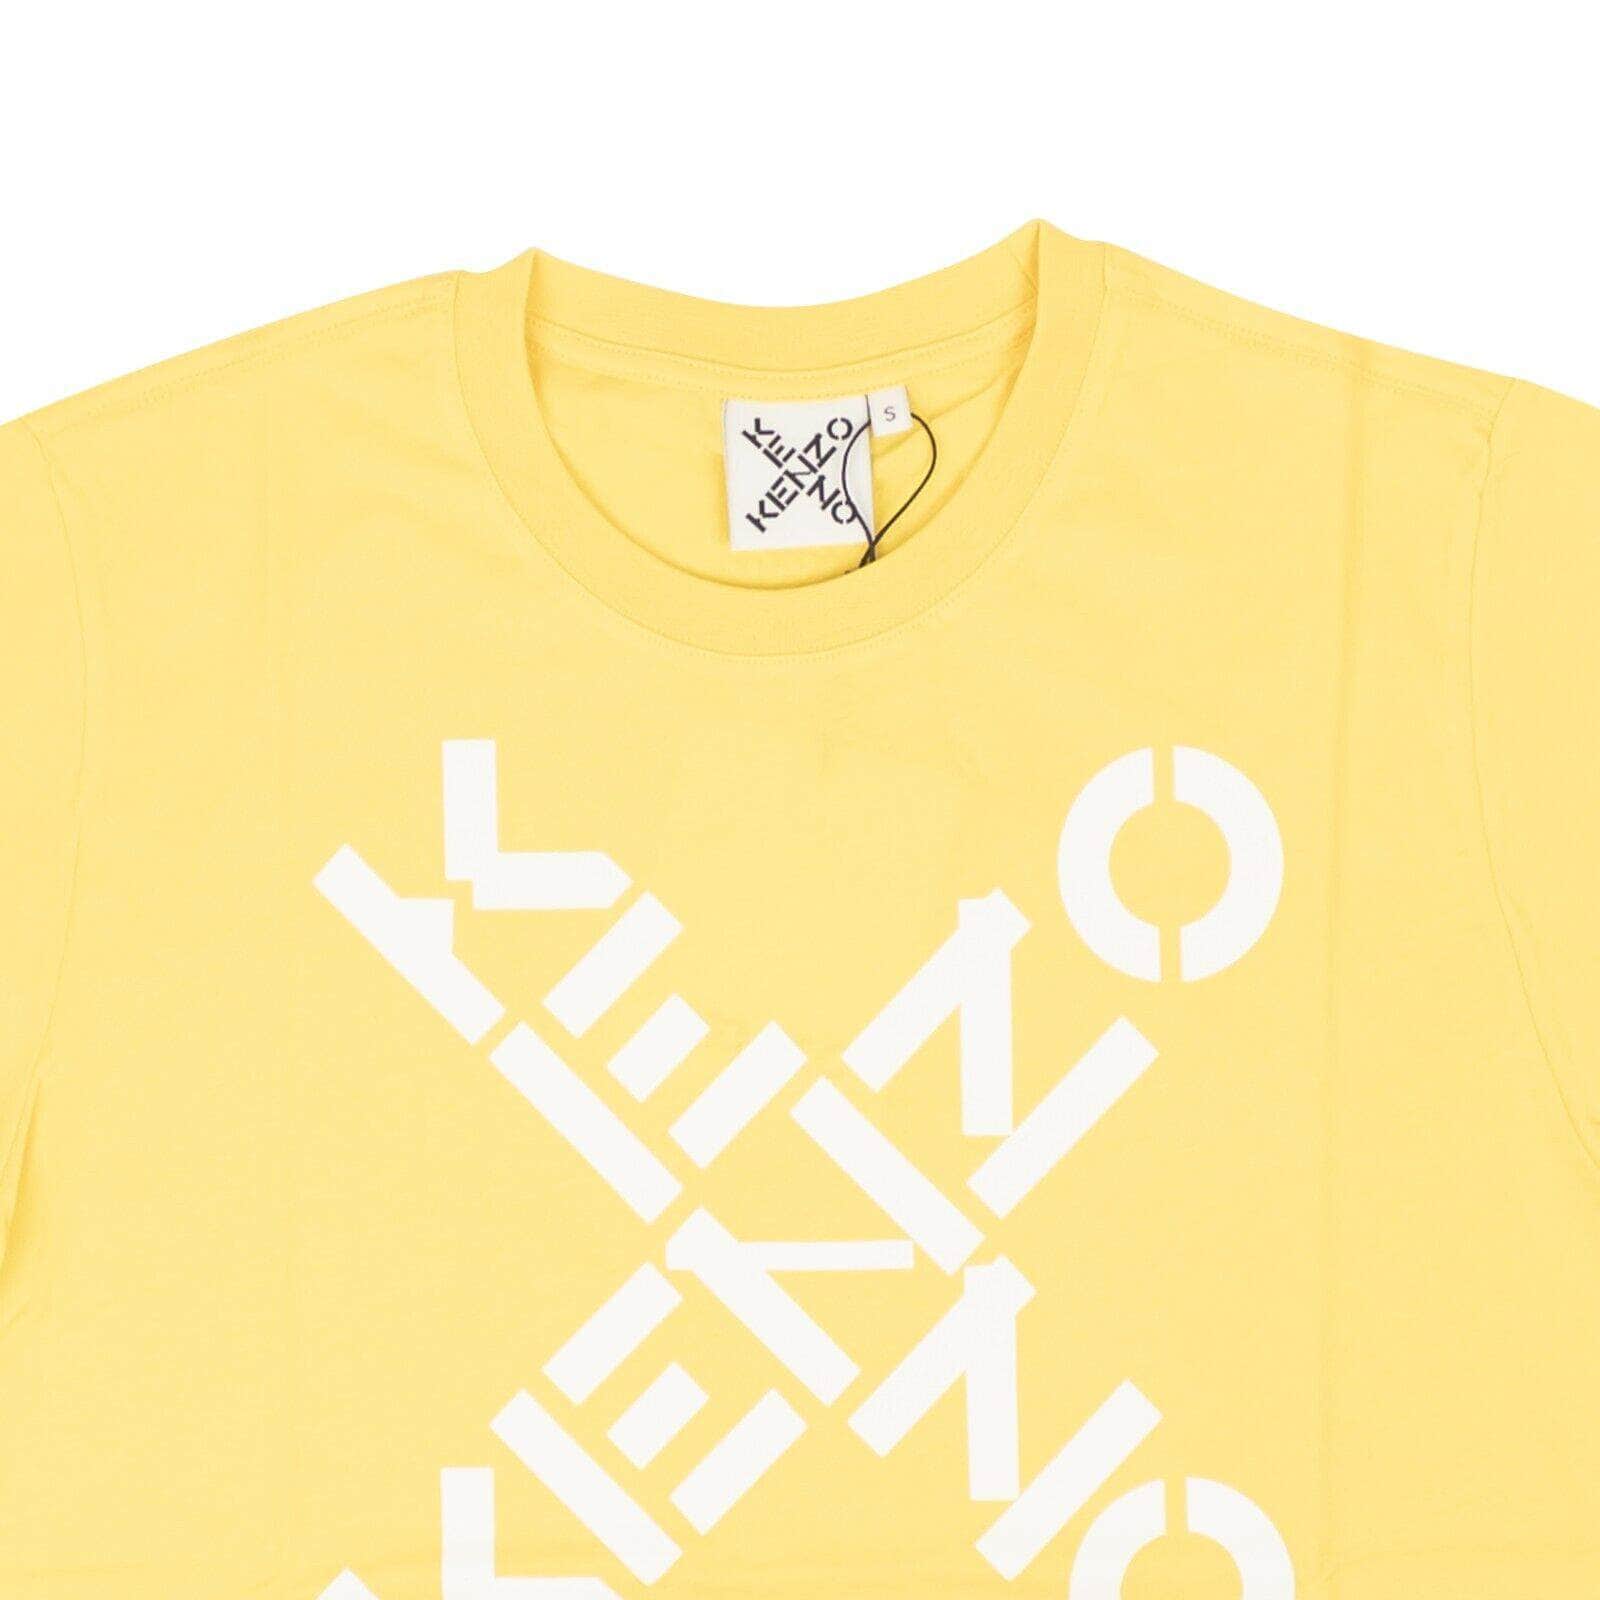 Kenzo Paris channelenable-all, chicmi, couponcollection, gender-mens, kenzo-paris, main-clothing, mens-shoes, size-l, size-m, size-s, size-xl, under-250 Yellow Big X Short Sleeve T-Shirt